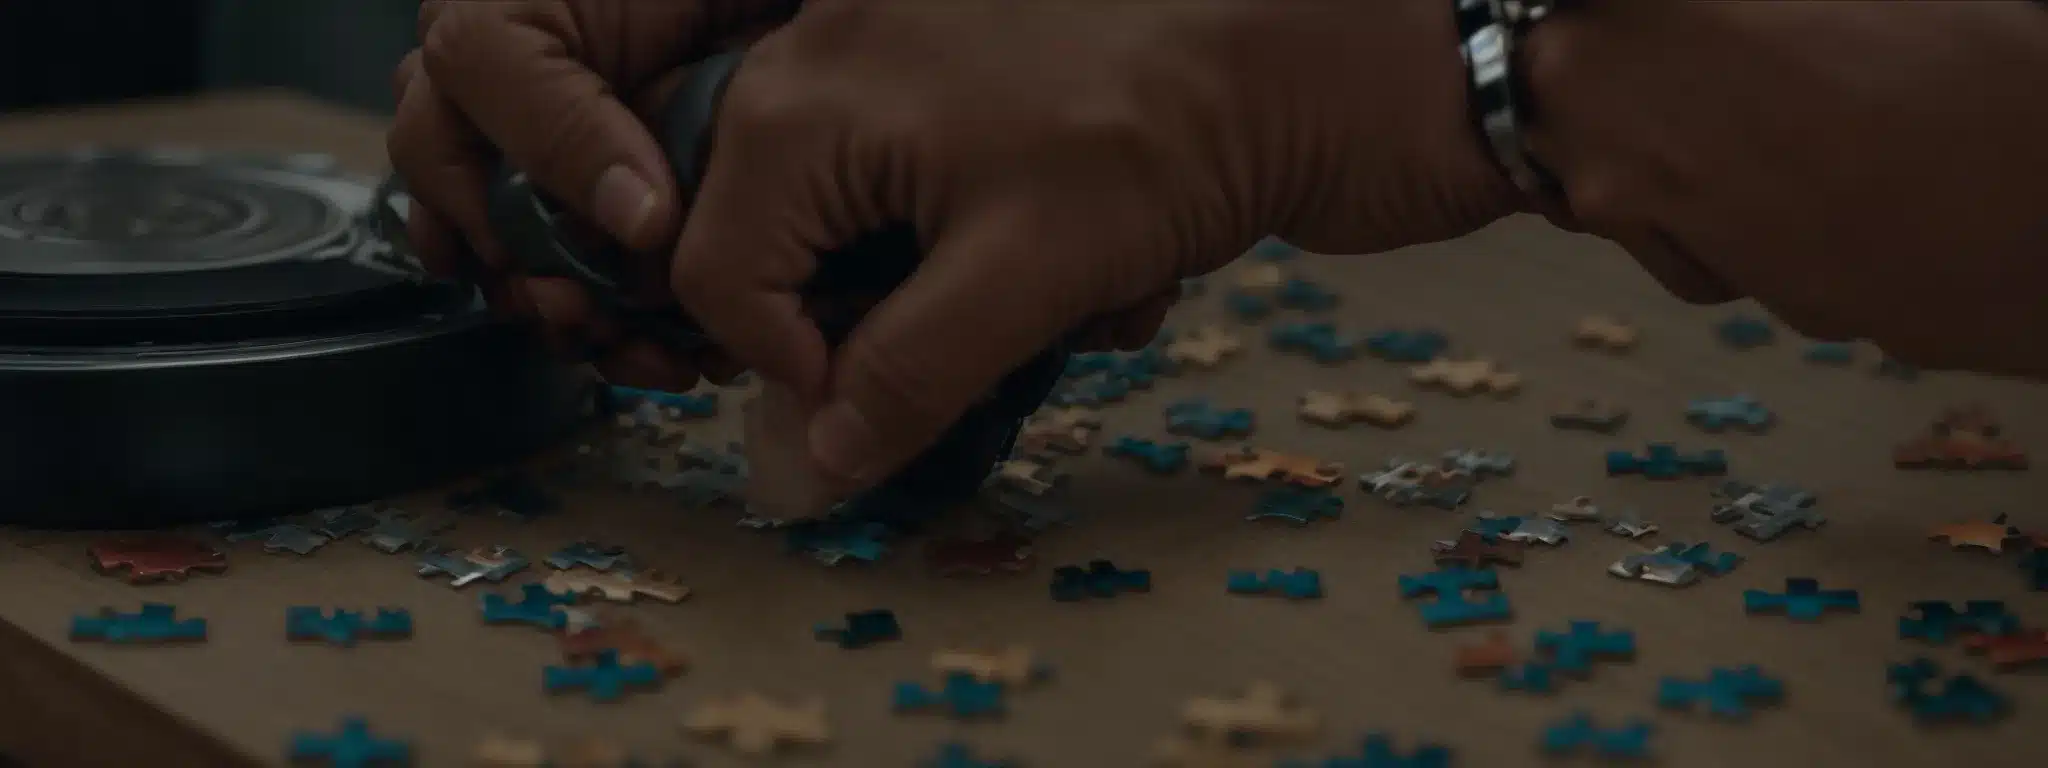 A Puzzle Being Assembled On A Table To Reveal A Cohesive Image.